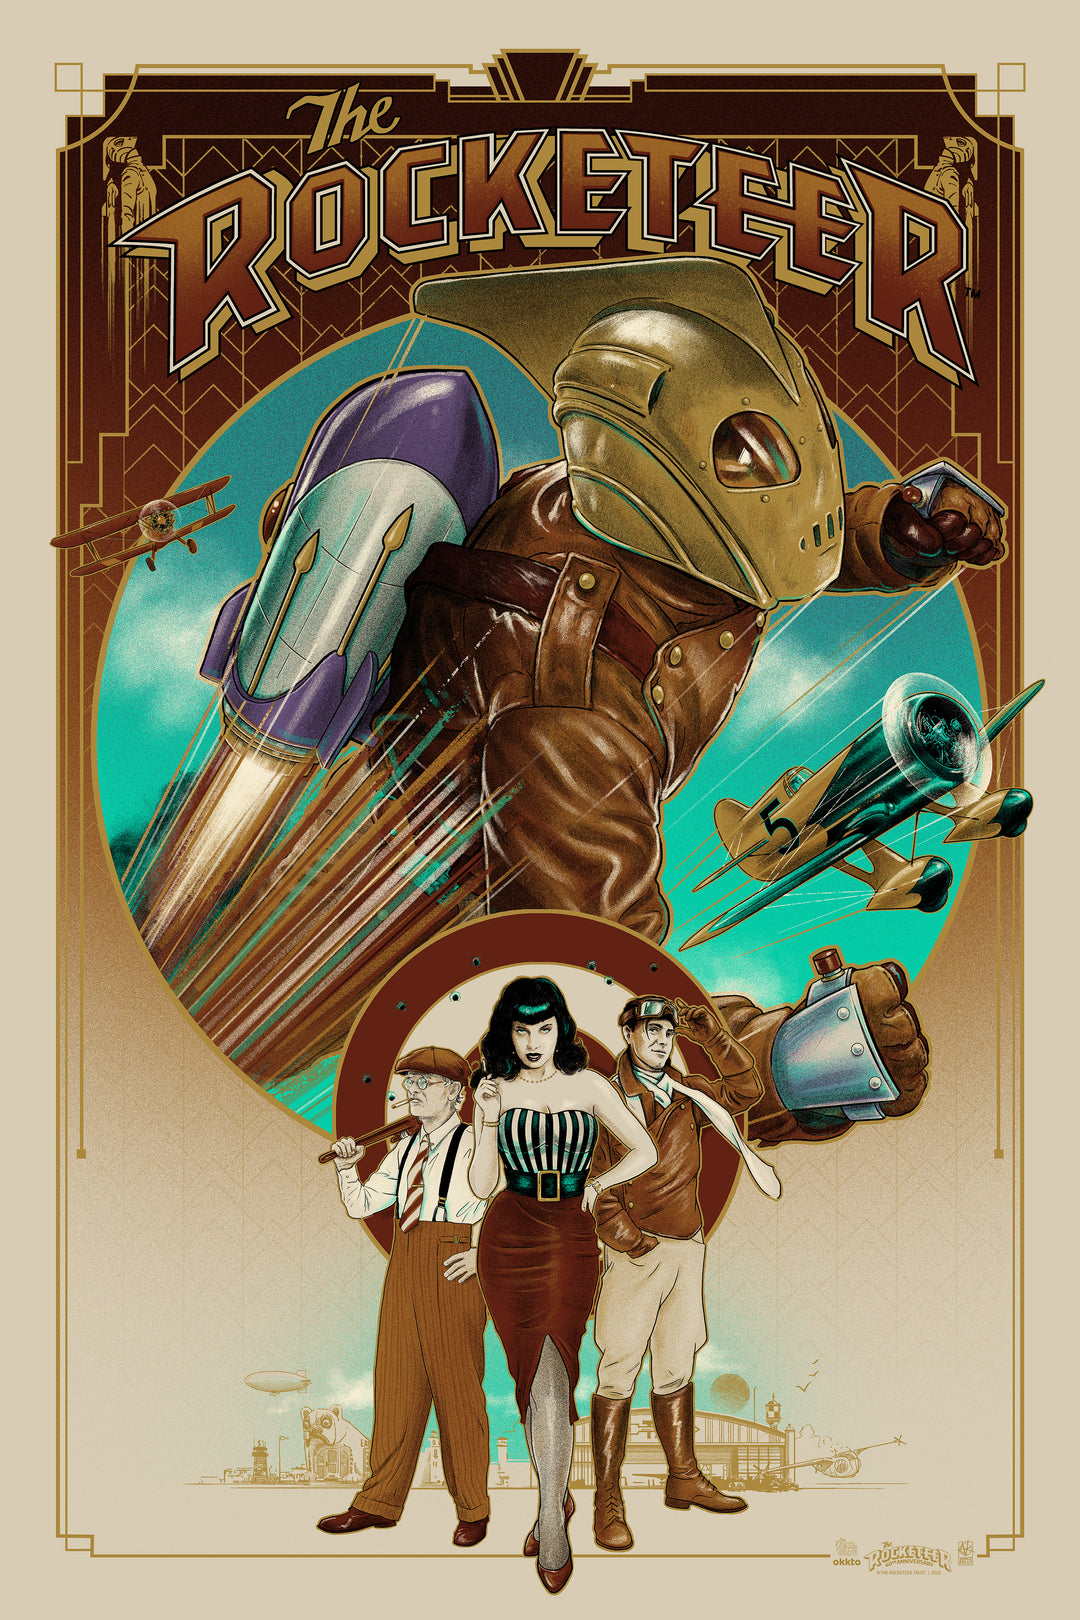 The Rocketeer 40th Anniversary Poster by Vance Kelly